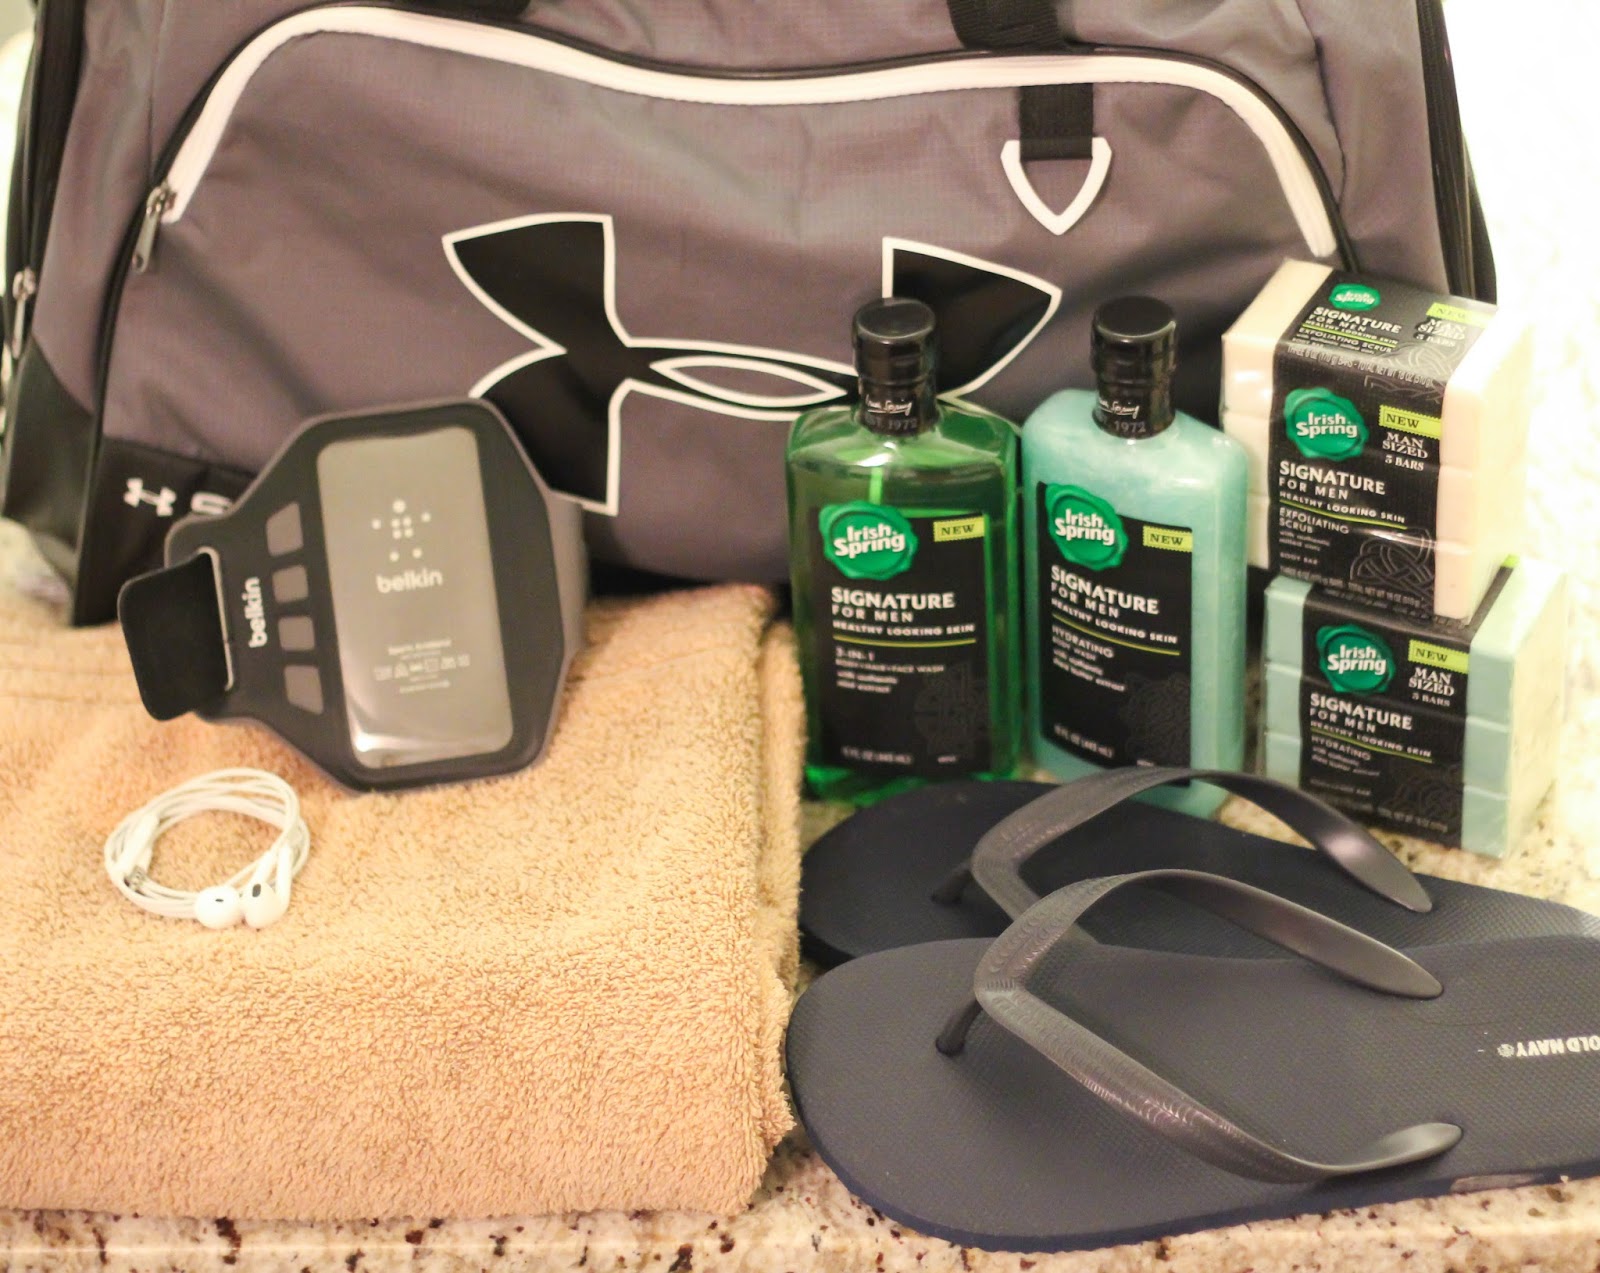 Gym Essentials For Men - Must Have Items